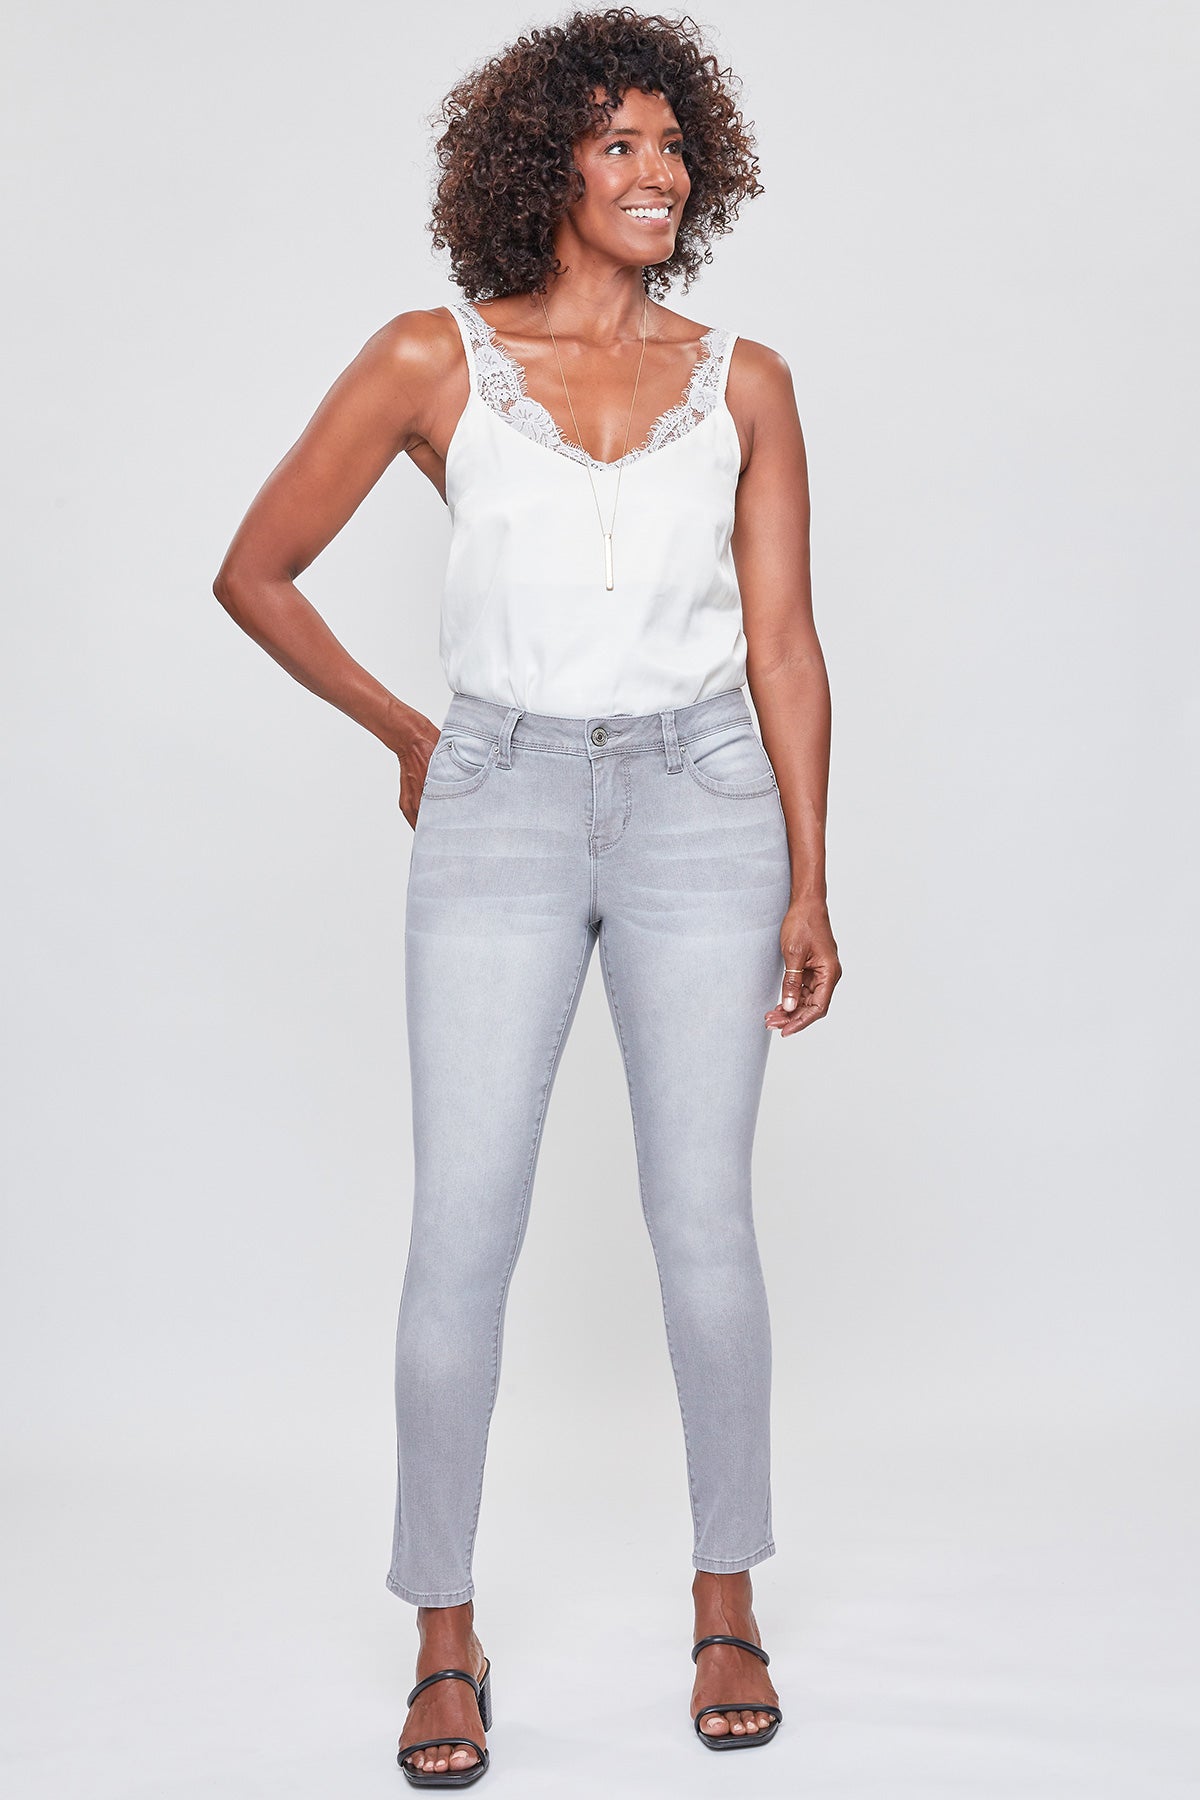 Missy Wannabettabutt 1-Button Mid-Rise Regular Hem Skinny Jean Made With Recycled Fibers Pack Of 12